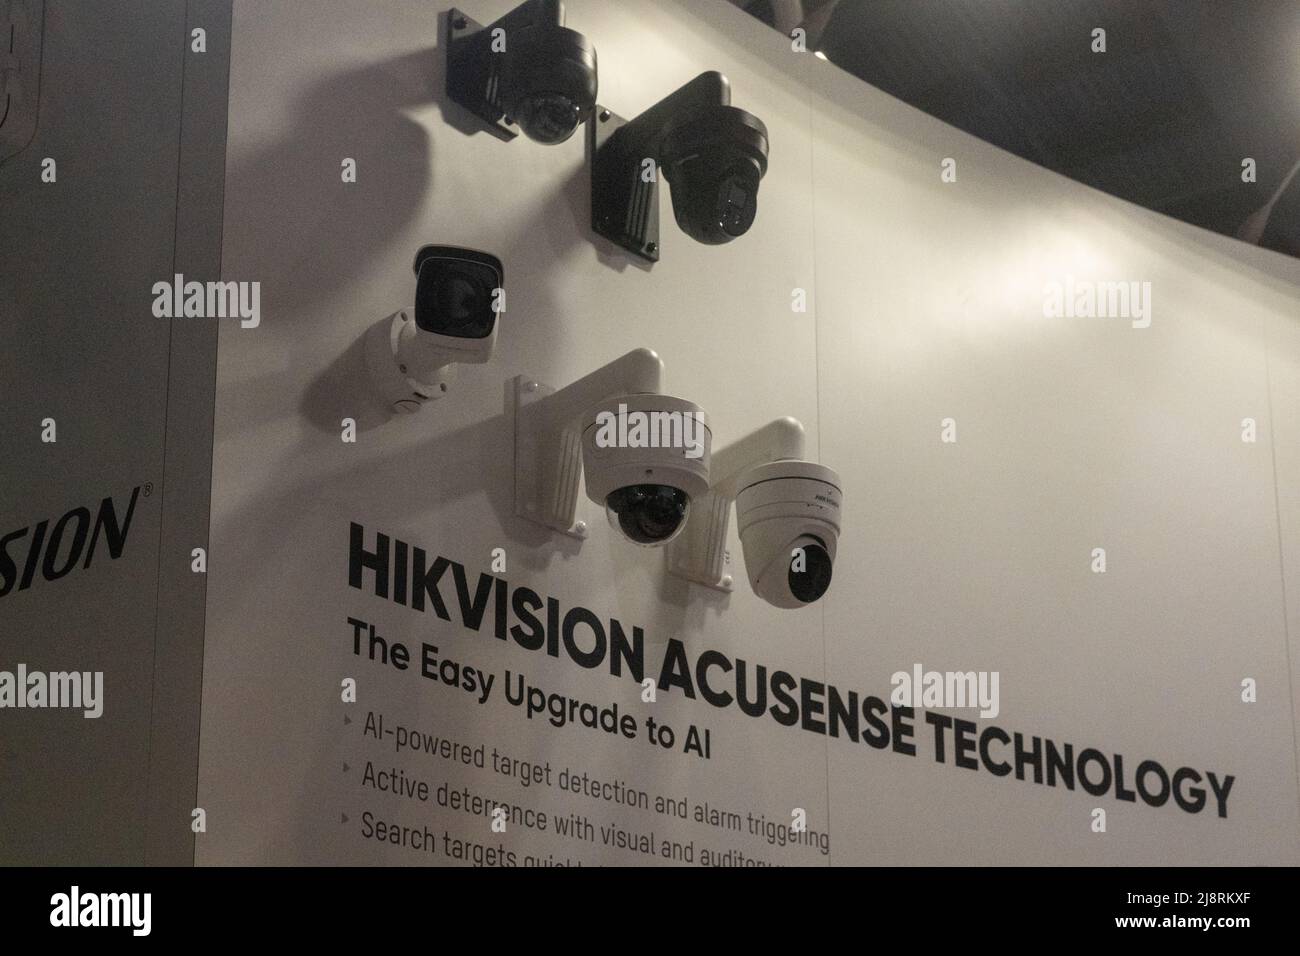 London, UK. 18th May, 2022. IFSEC International security conference at the Excel Centre London, Hikvision stand Credit: Ian Davidson/Alamy Live News Stock Photo